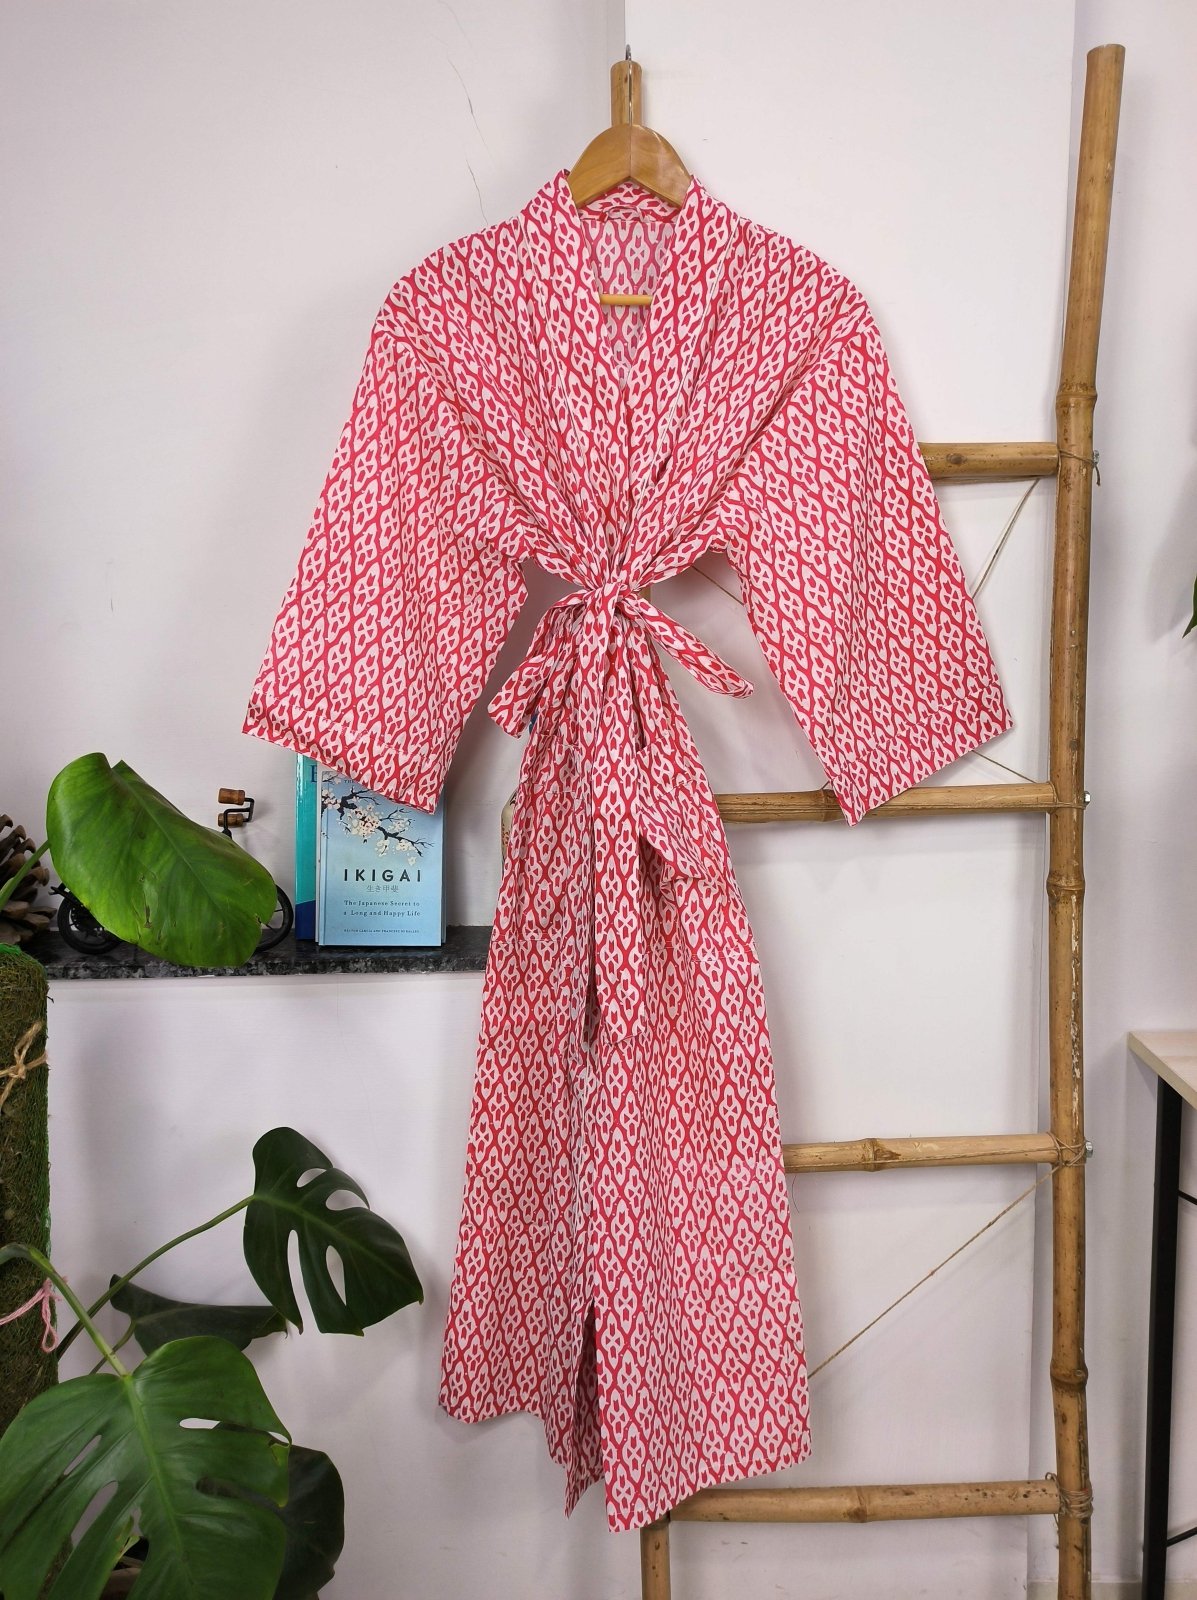 Boho Cotton Kimono House Robe Indian Handprinted Pink White Abstract Print | Lightweight Summer Luxury Beach Holiday Cover Up Stunning Dress - The Eastern Loom